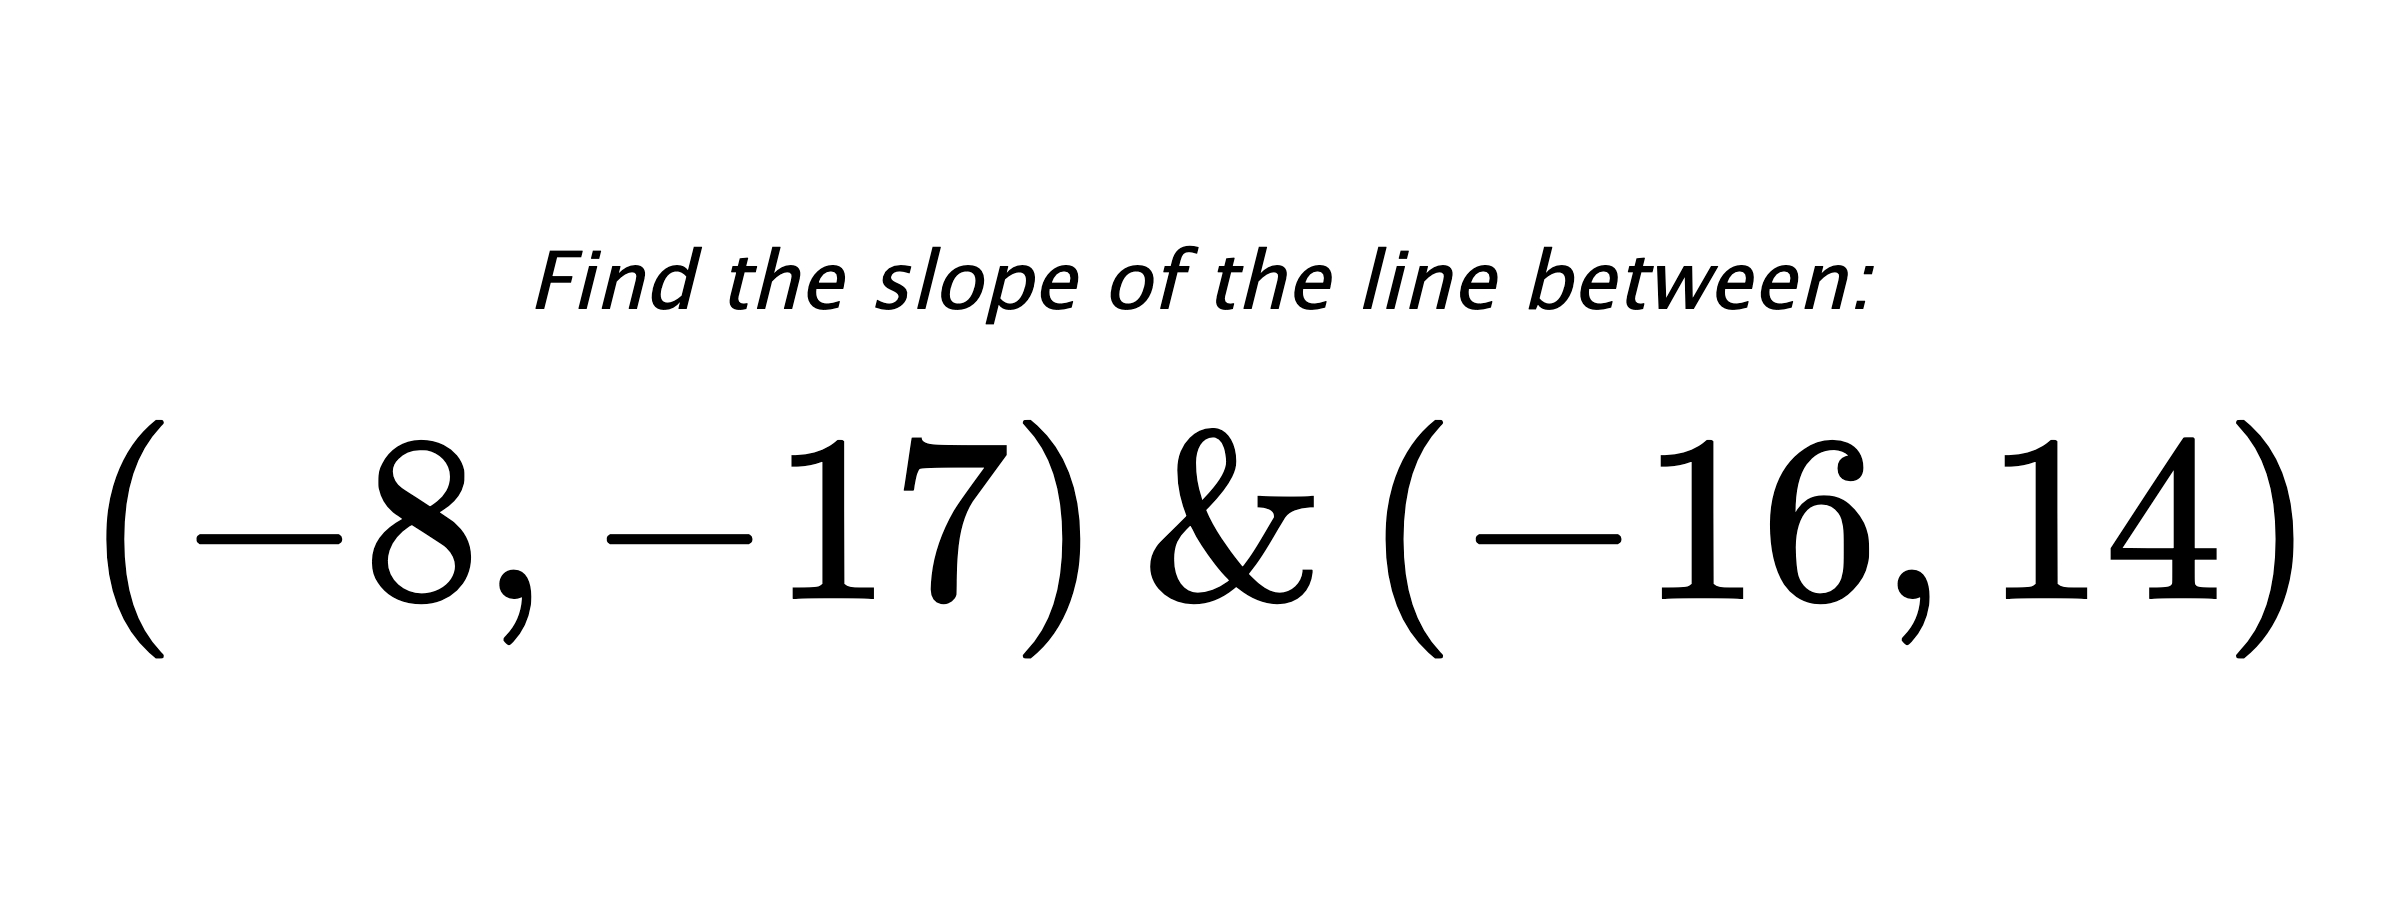 Find the slope of the line between: $ (-8,-17) \hspace{0.5cm} \text{&} \hspace{0.5cm} (-16,14) $